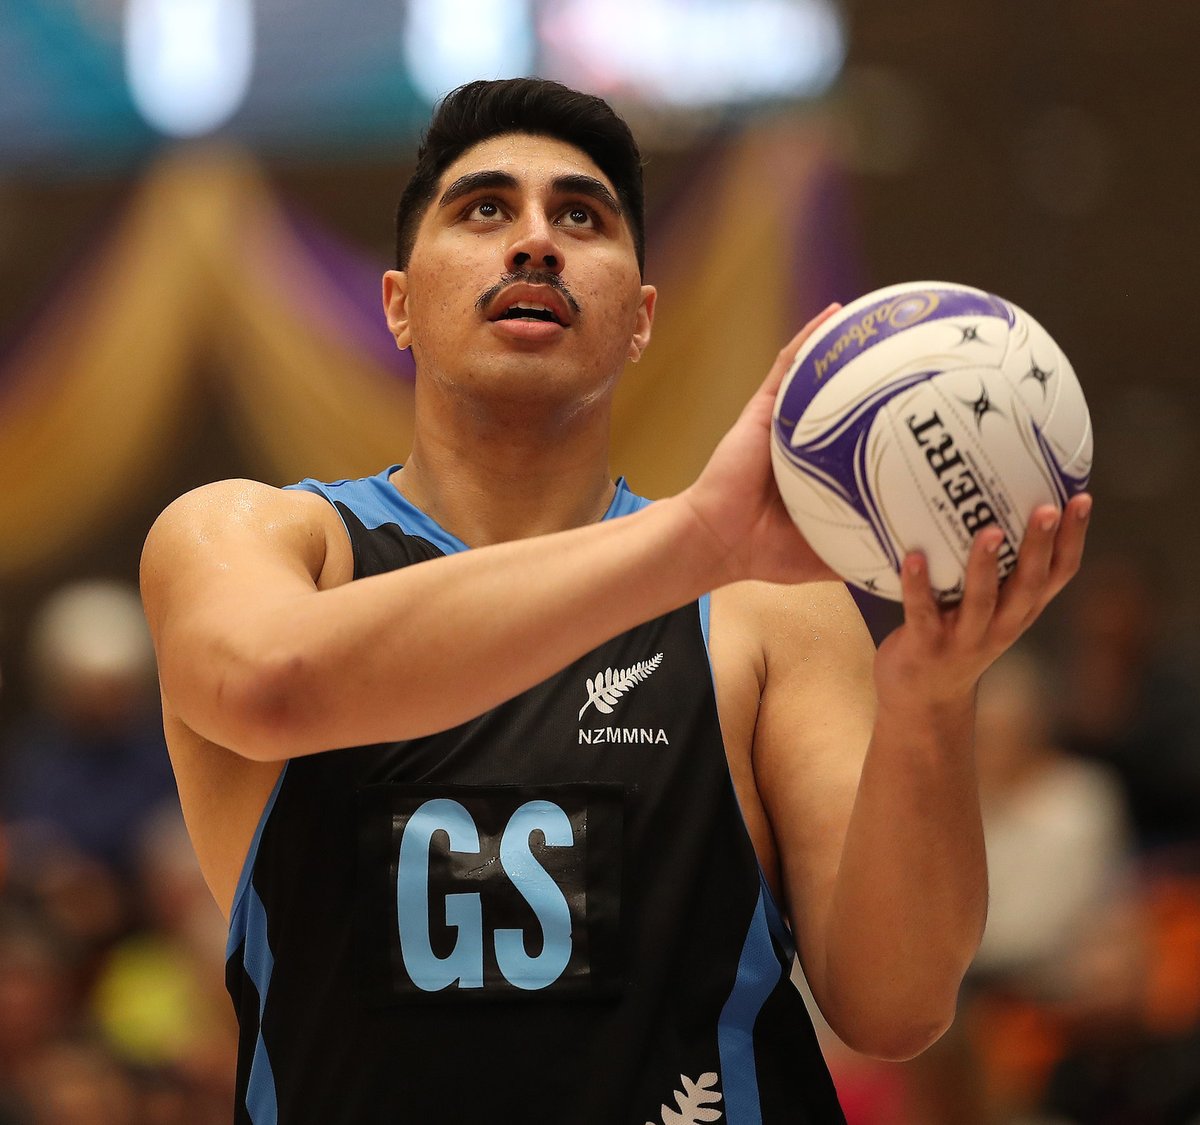 Missing from recent clashes, towering shooter Junior Levi will captain the New Zealand Men to play Australia in a Labour Day spectacle at Spark Arena in Auckland on October 23. Read the full story: bit.ly/48NtQzx 📷 @mbphotonz